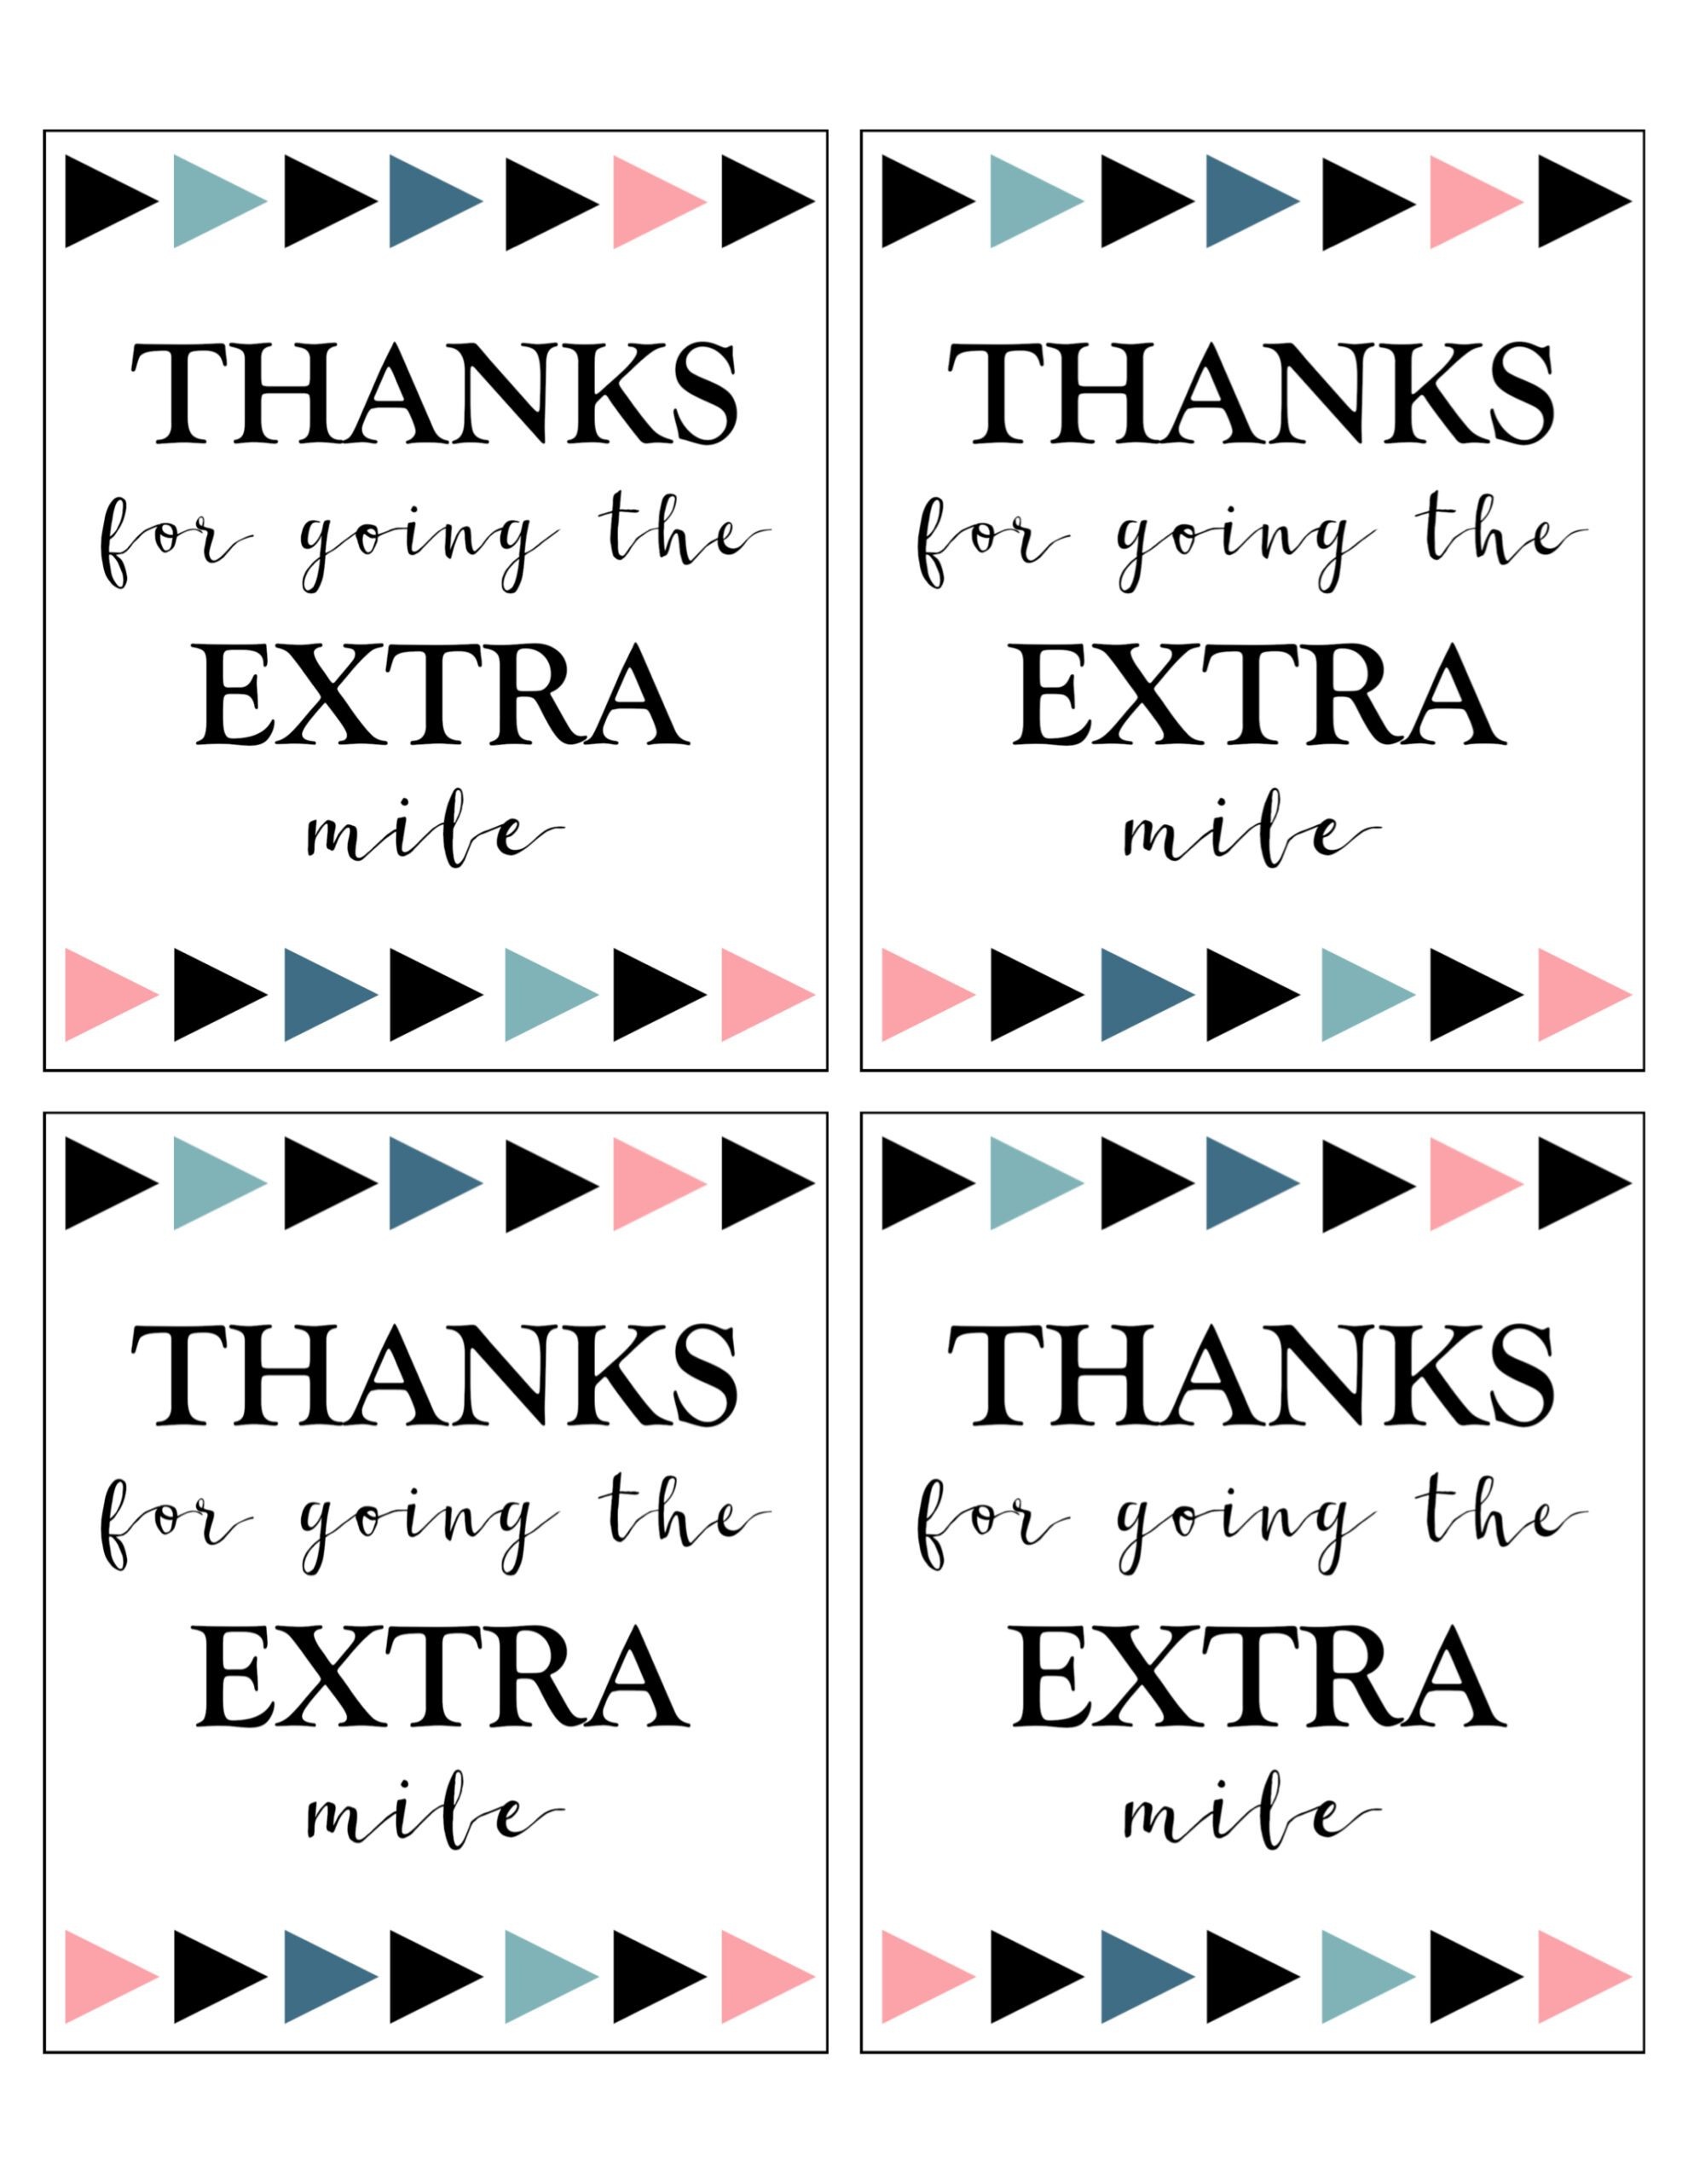 Extra Gum Thank You Printable - Paper Trail Design - Free Printable Volunteer Thank You Cards